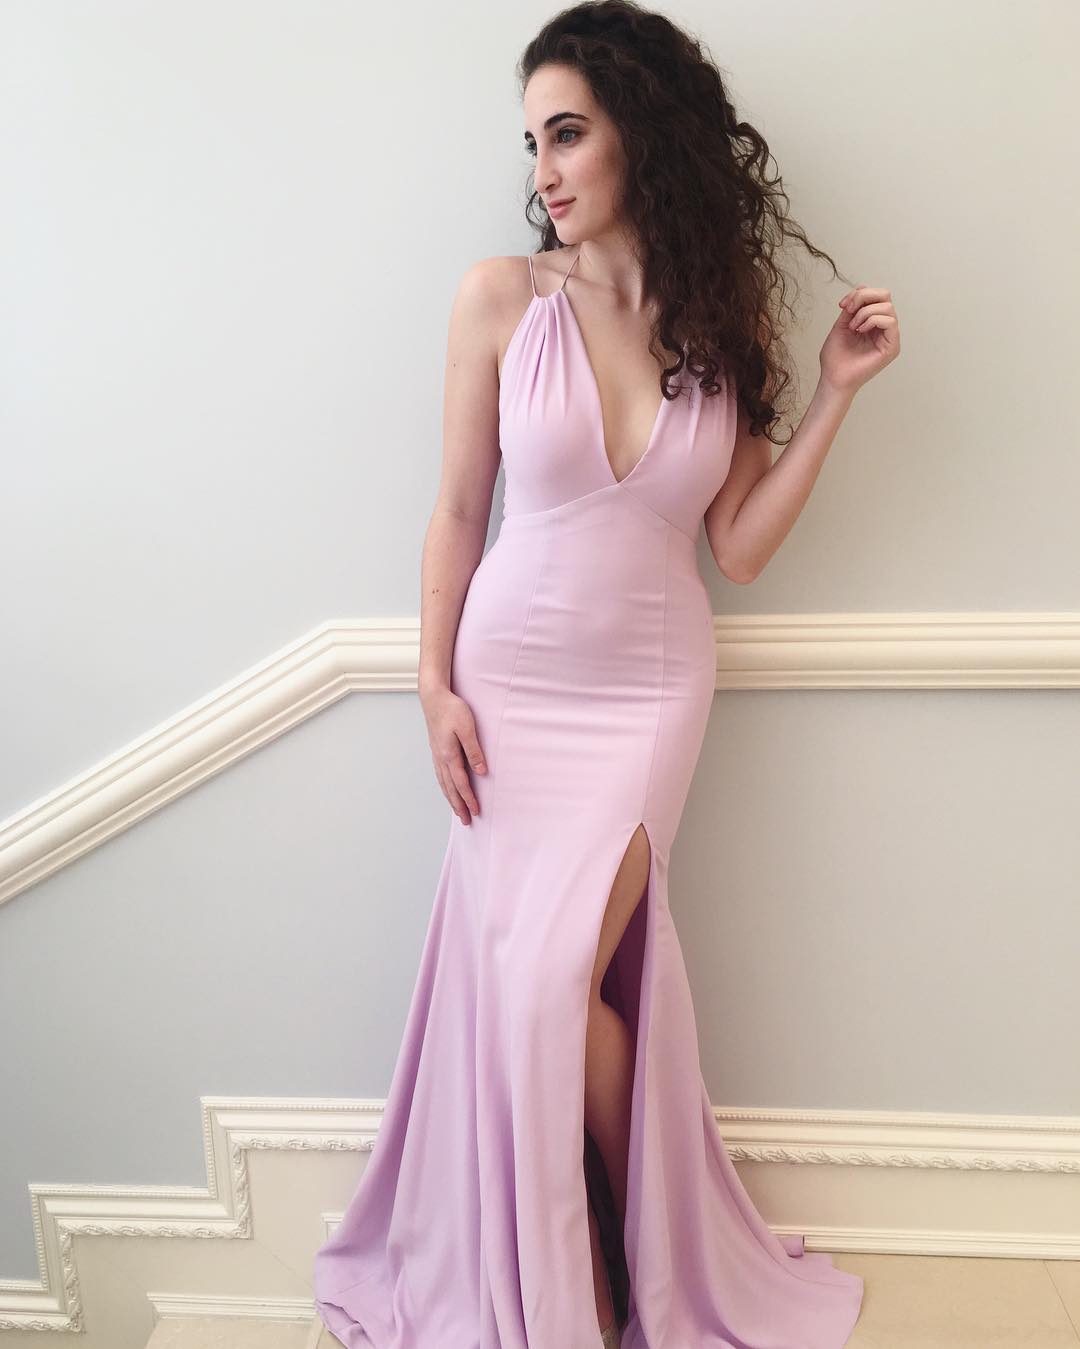 Charming Pink Mermaid Long Prom Dress,sexy Deep V-neck Split Prom Dress For Women,formal Evening/party Gowns 2018